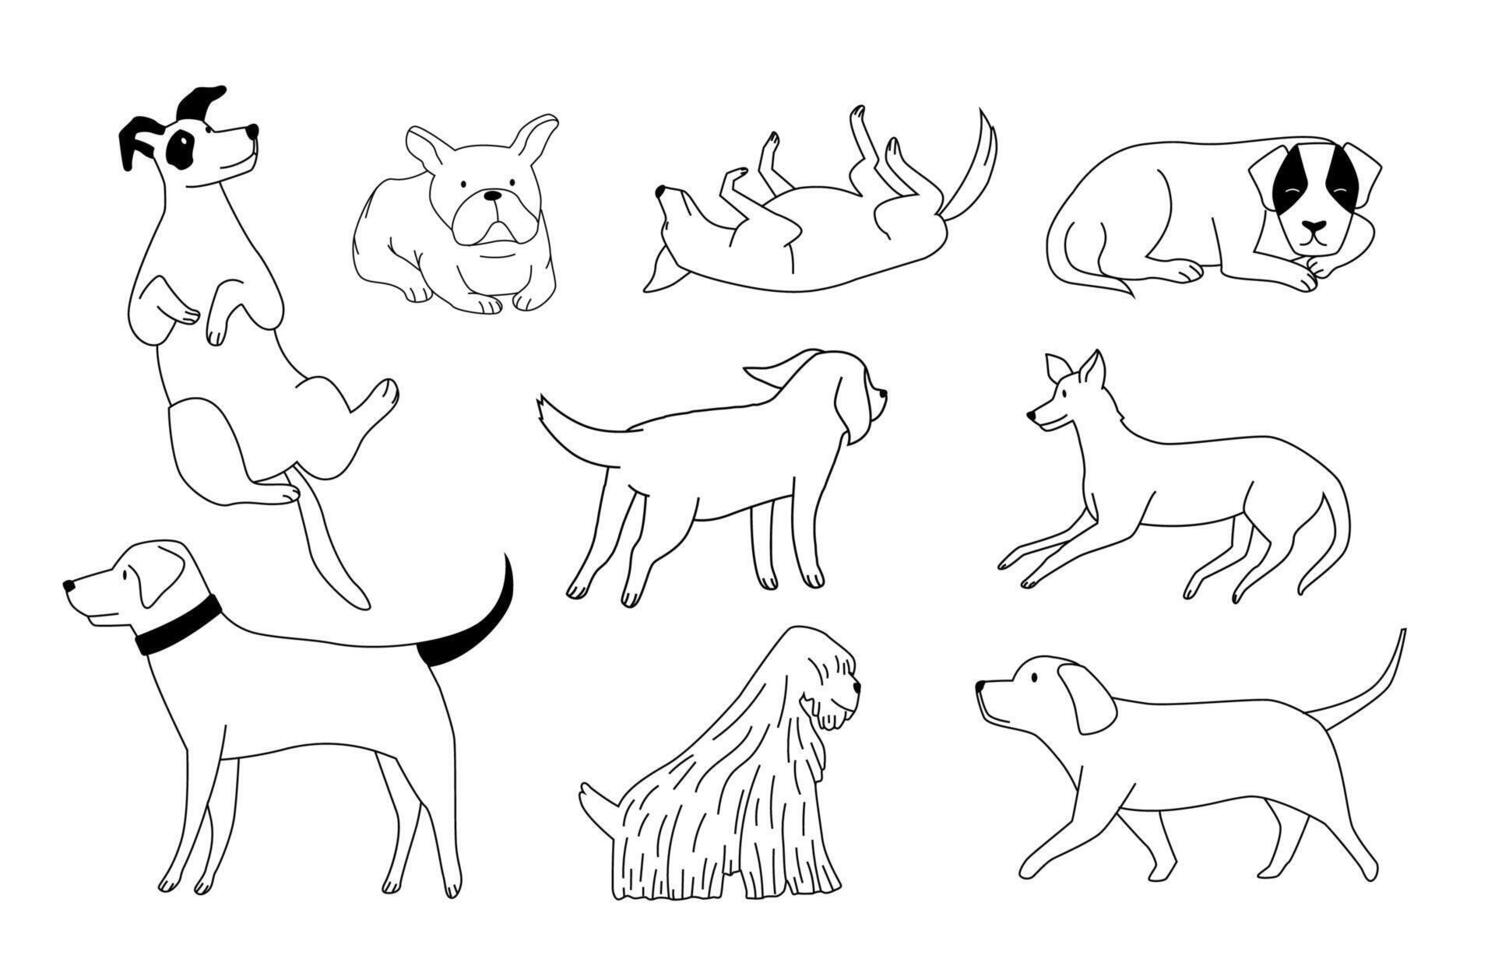 Cute doodle dog. Furry playful domestic animals of different breeds. Adorable puppies outlines in various positions vector